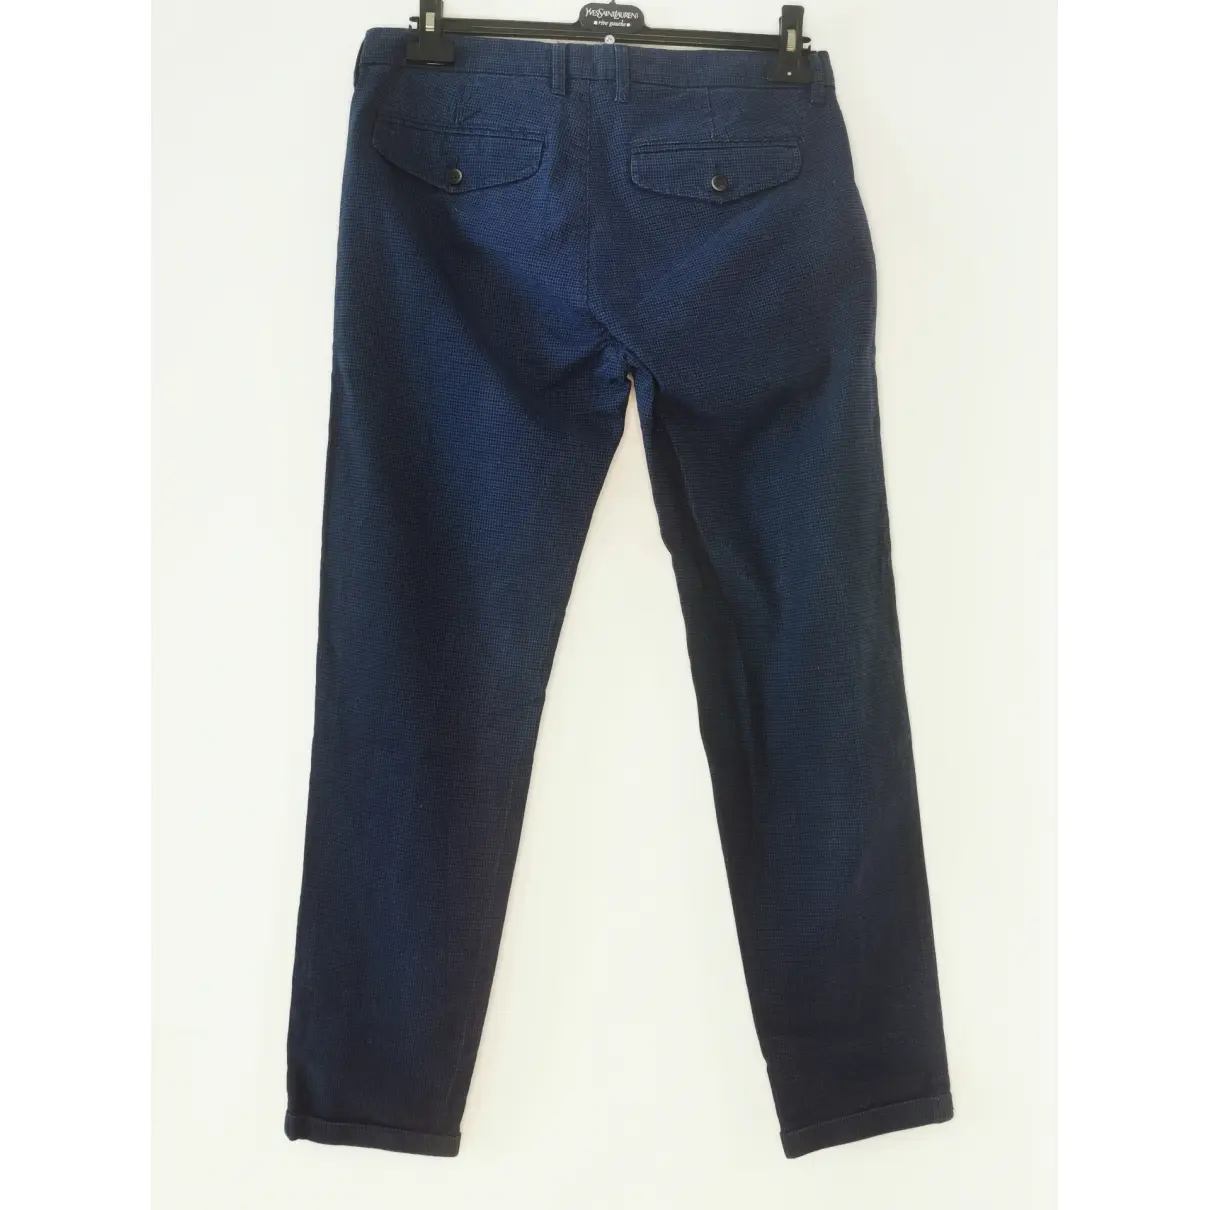 Buy Fay Trousers online